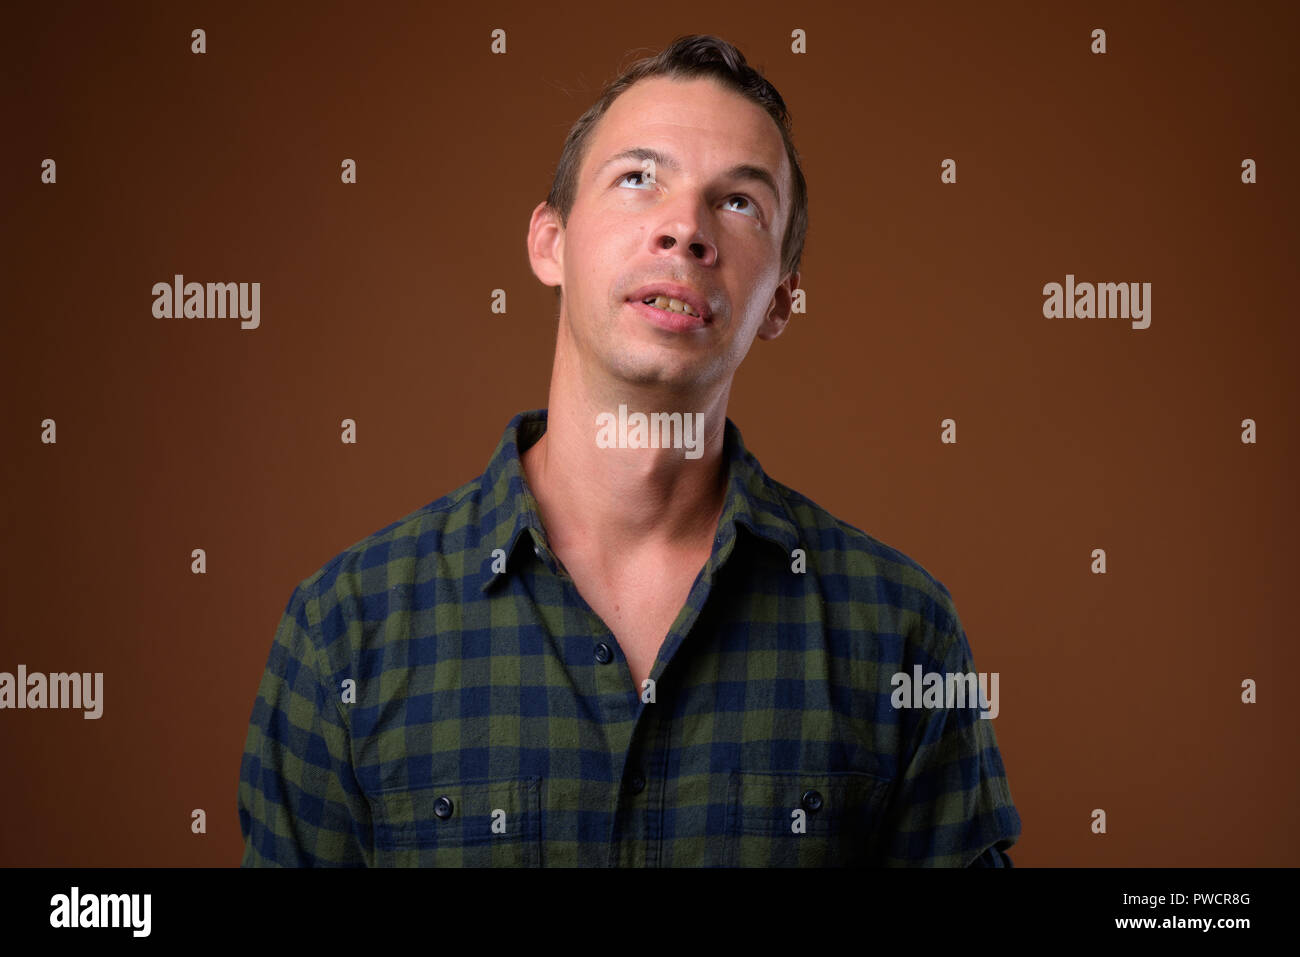 Studio shot of man against brown background Stock Photo